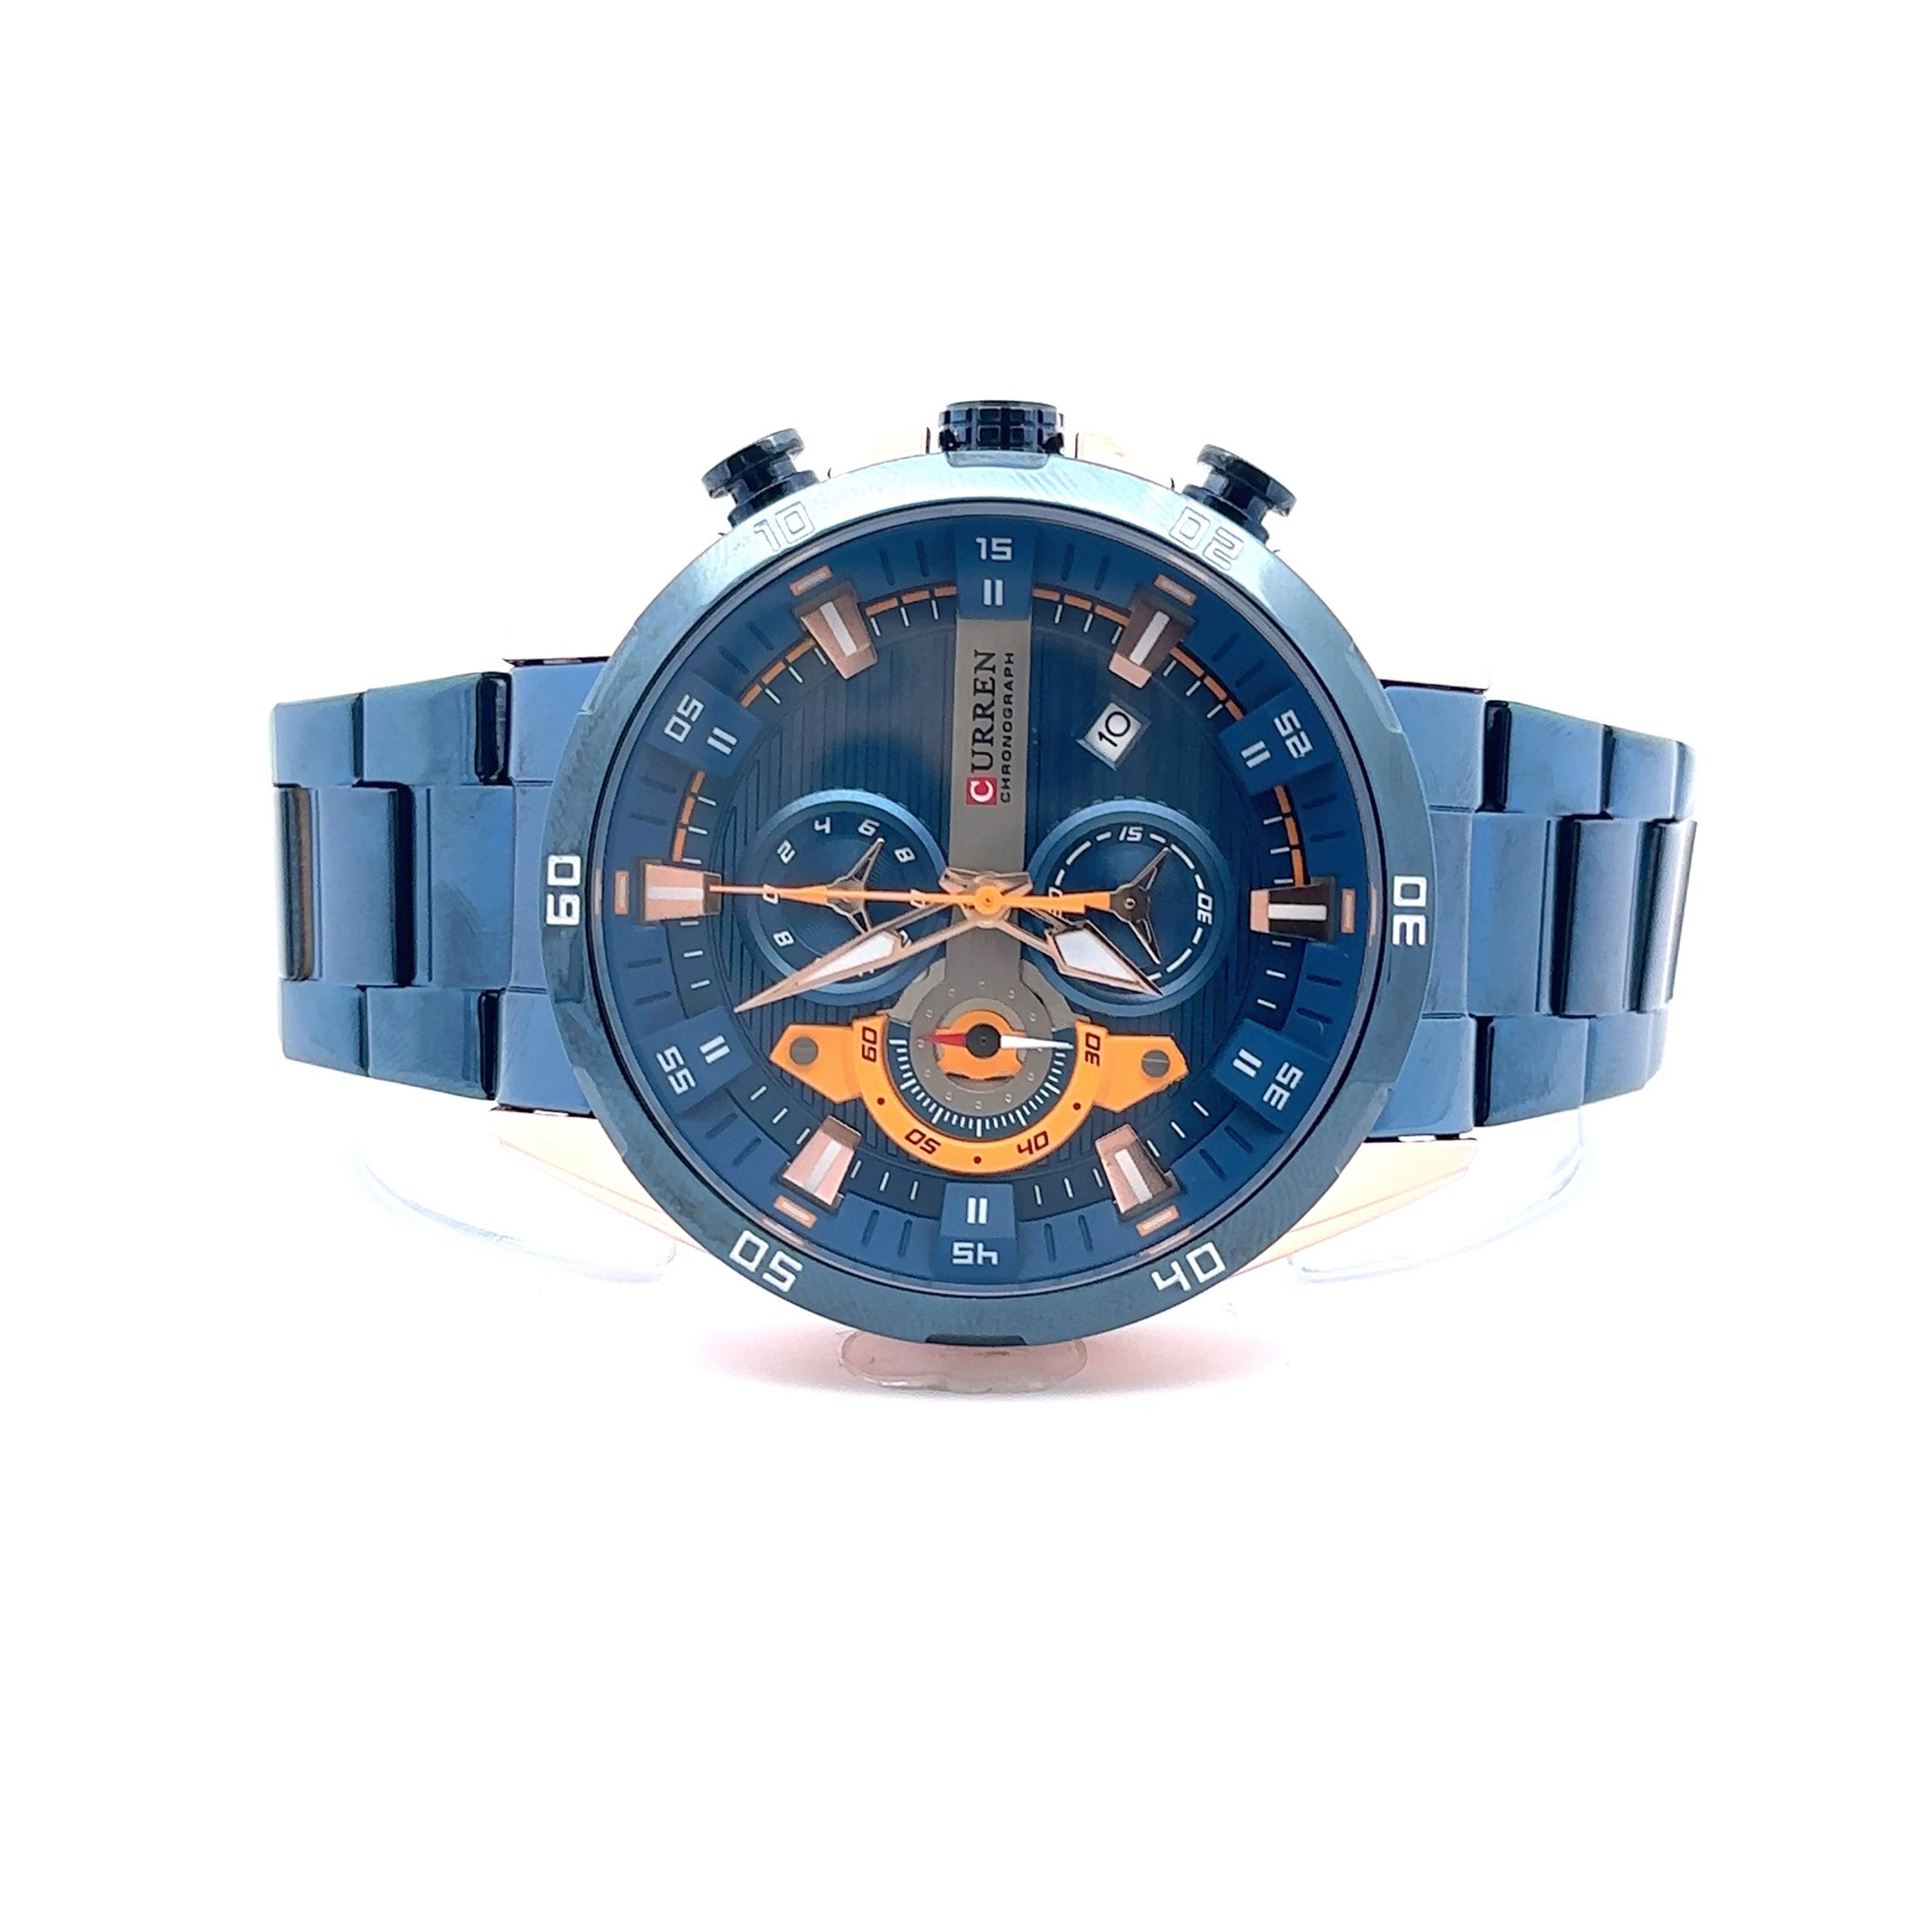 SOLIVAGANT METAL BACK BLUE STAINLESS ICED OUT WATCH I 5517813